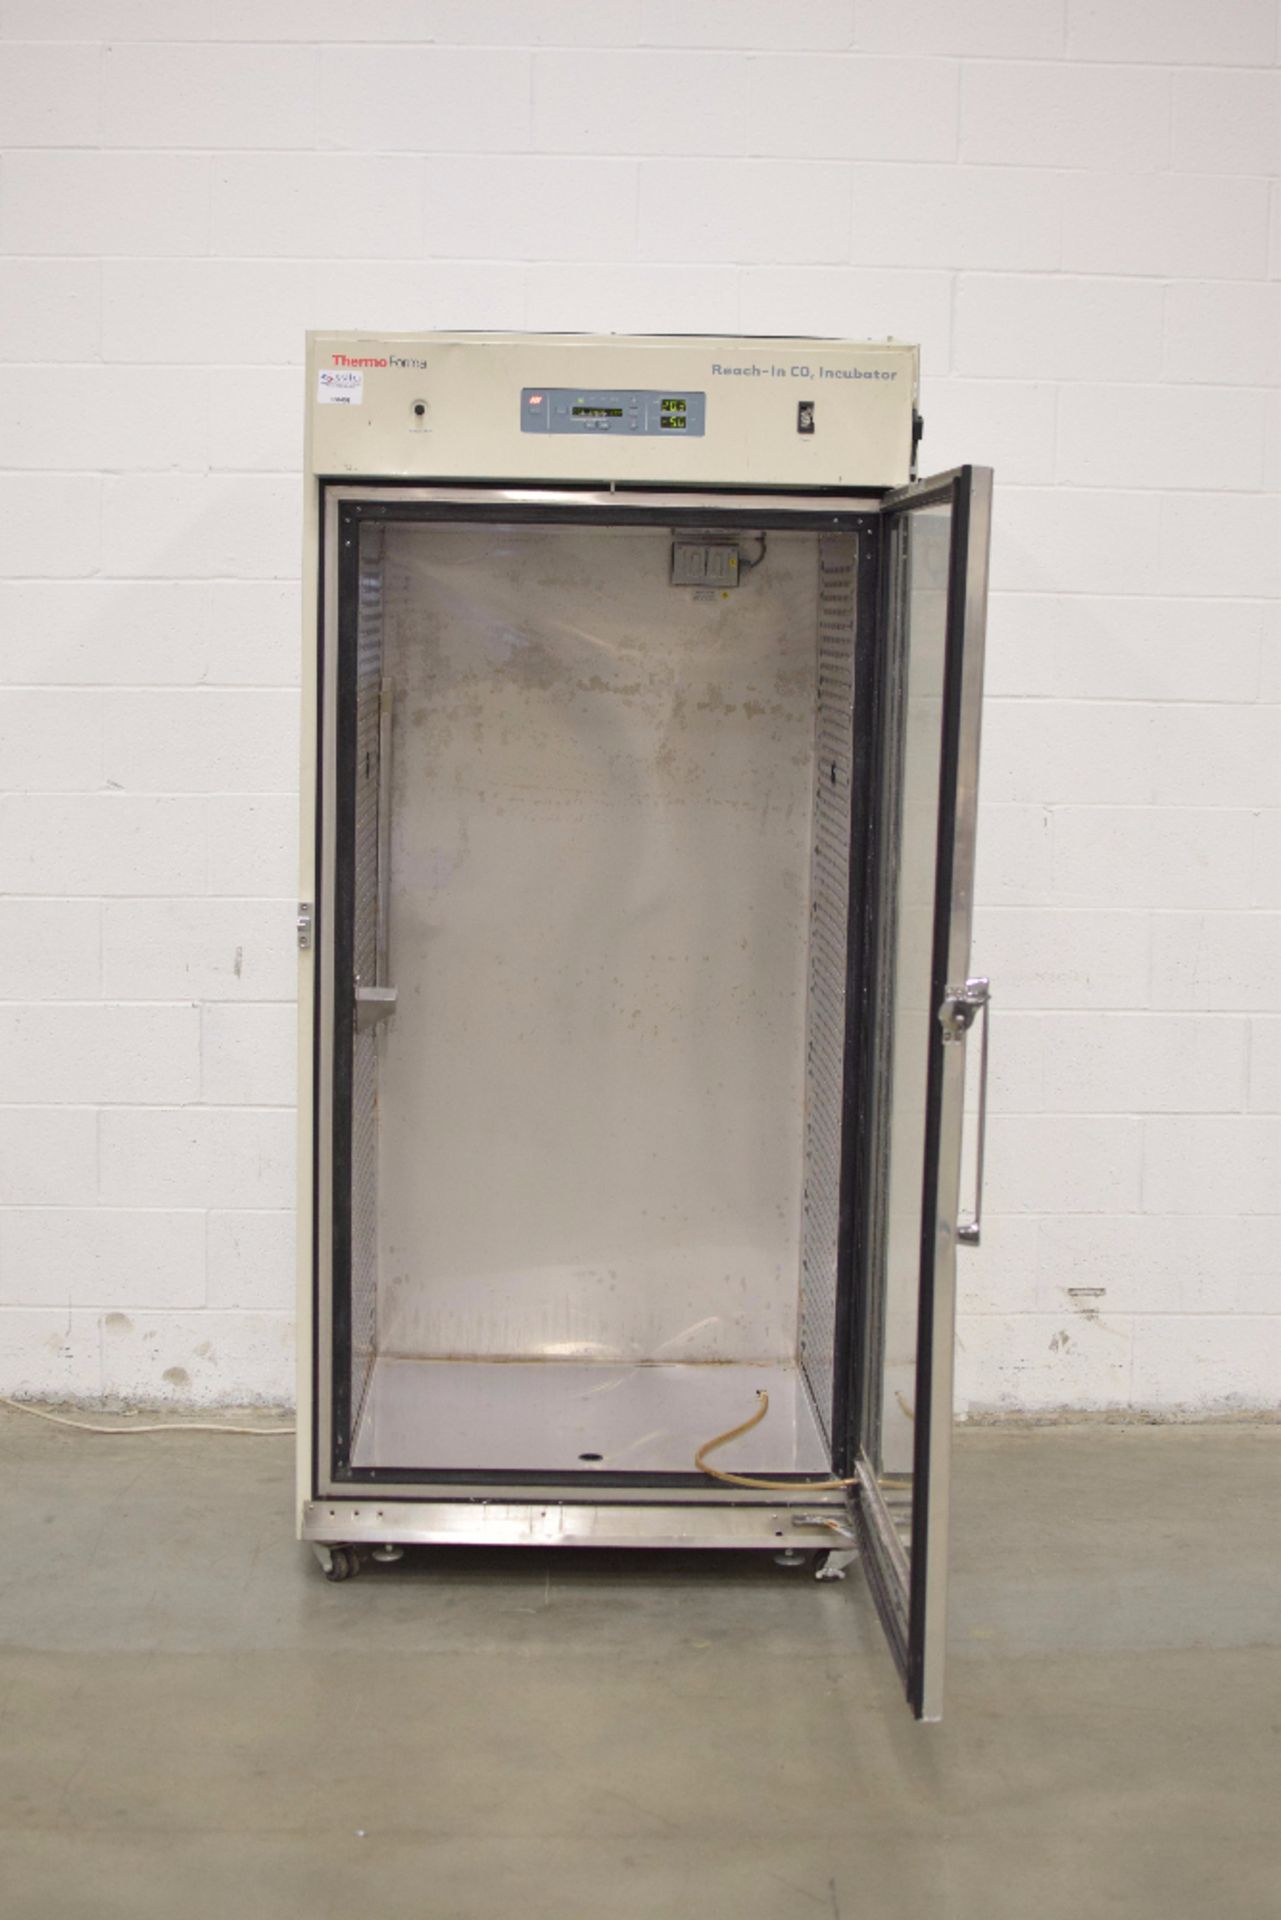 Thermo Forma 3950 Reach-In CO2 Incubator - Image 4 of 7